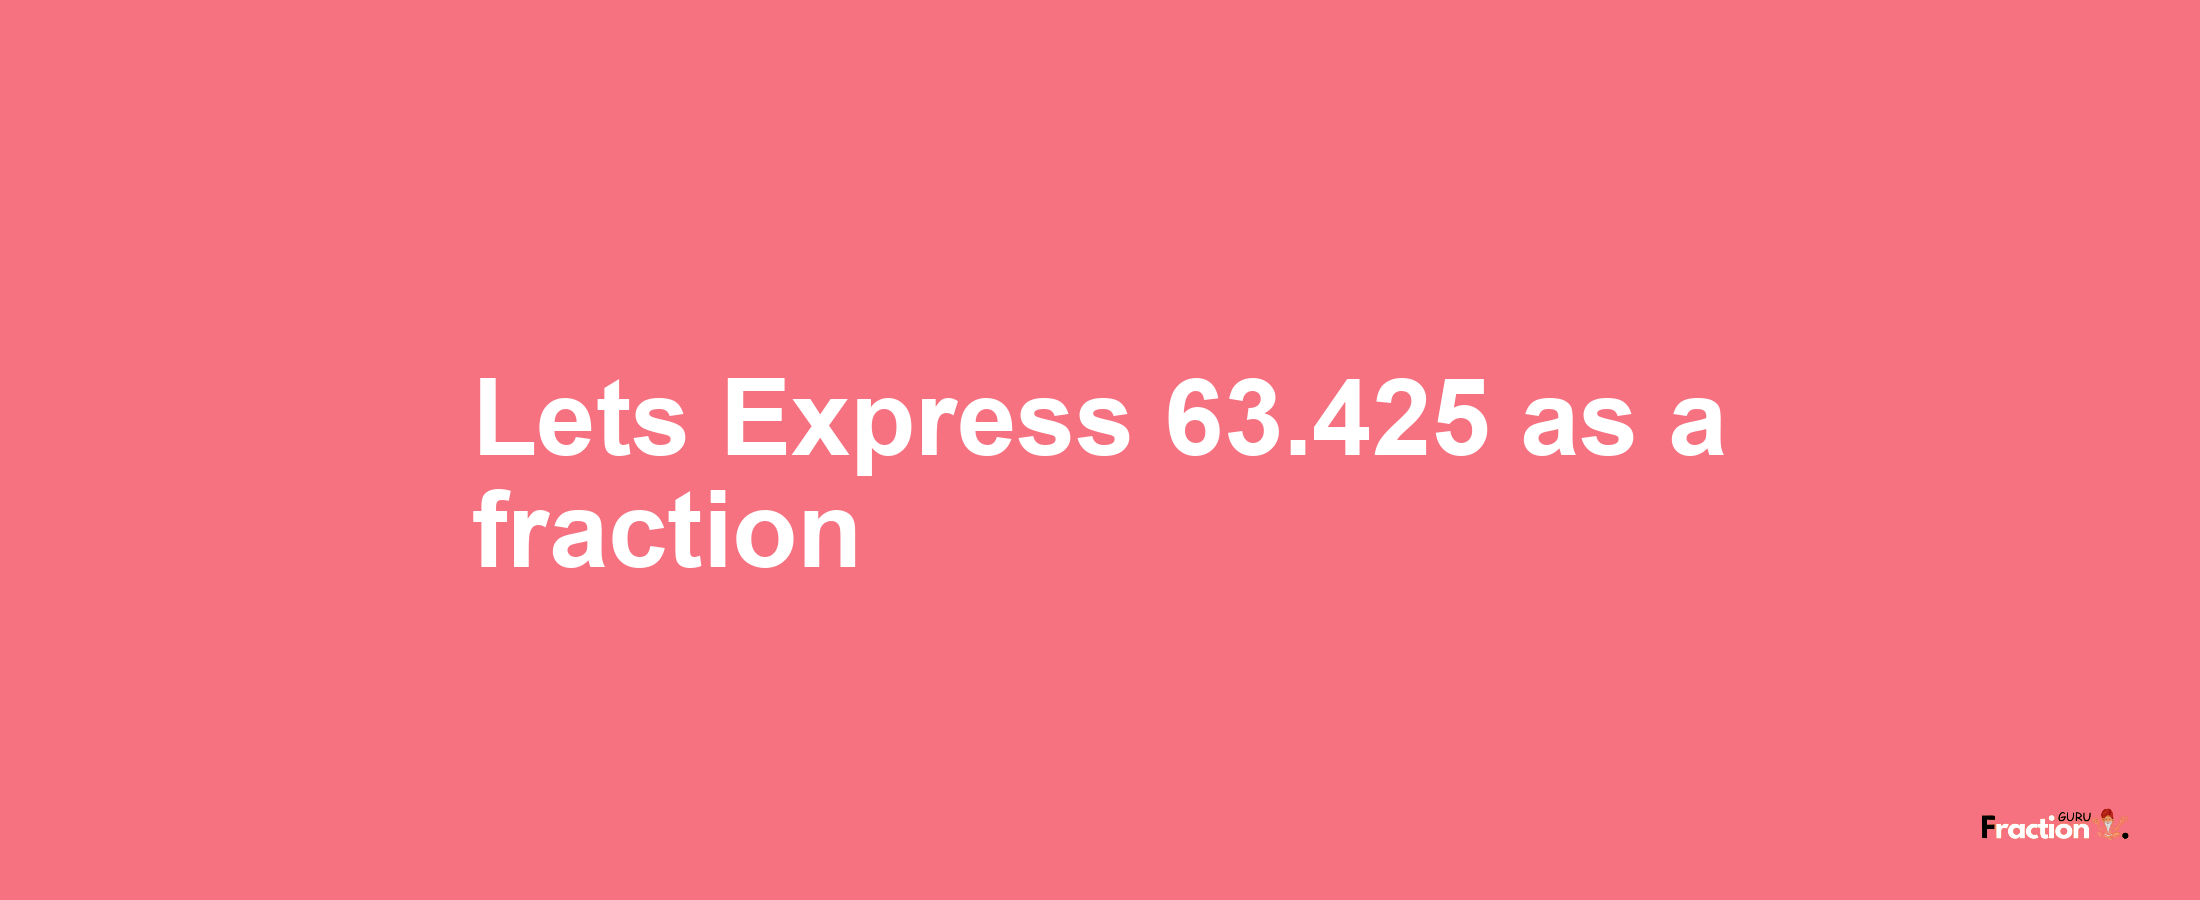 Lets Express 63.425 as afraction